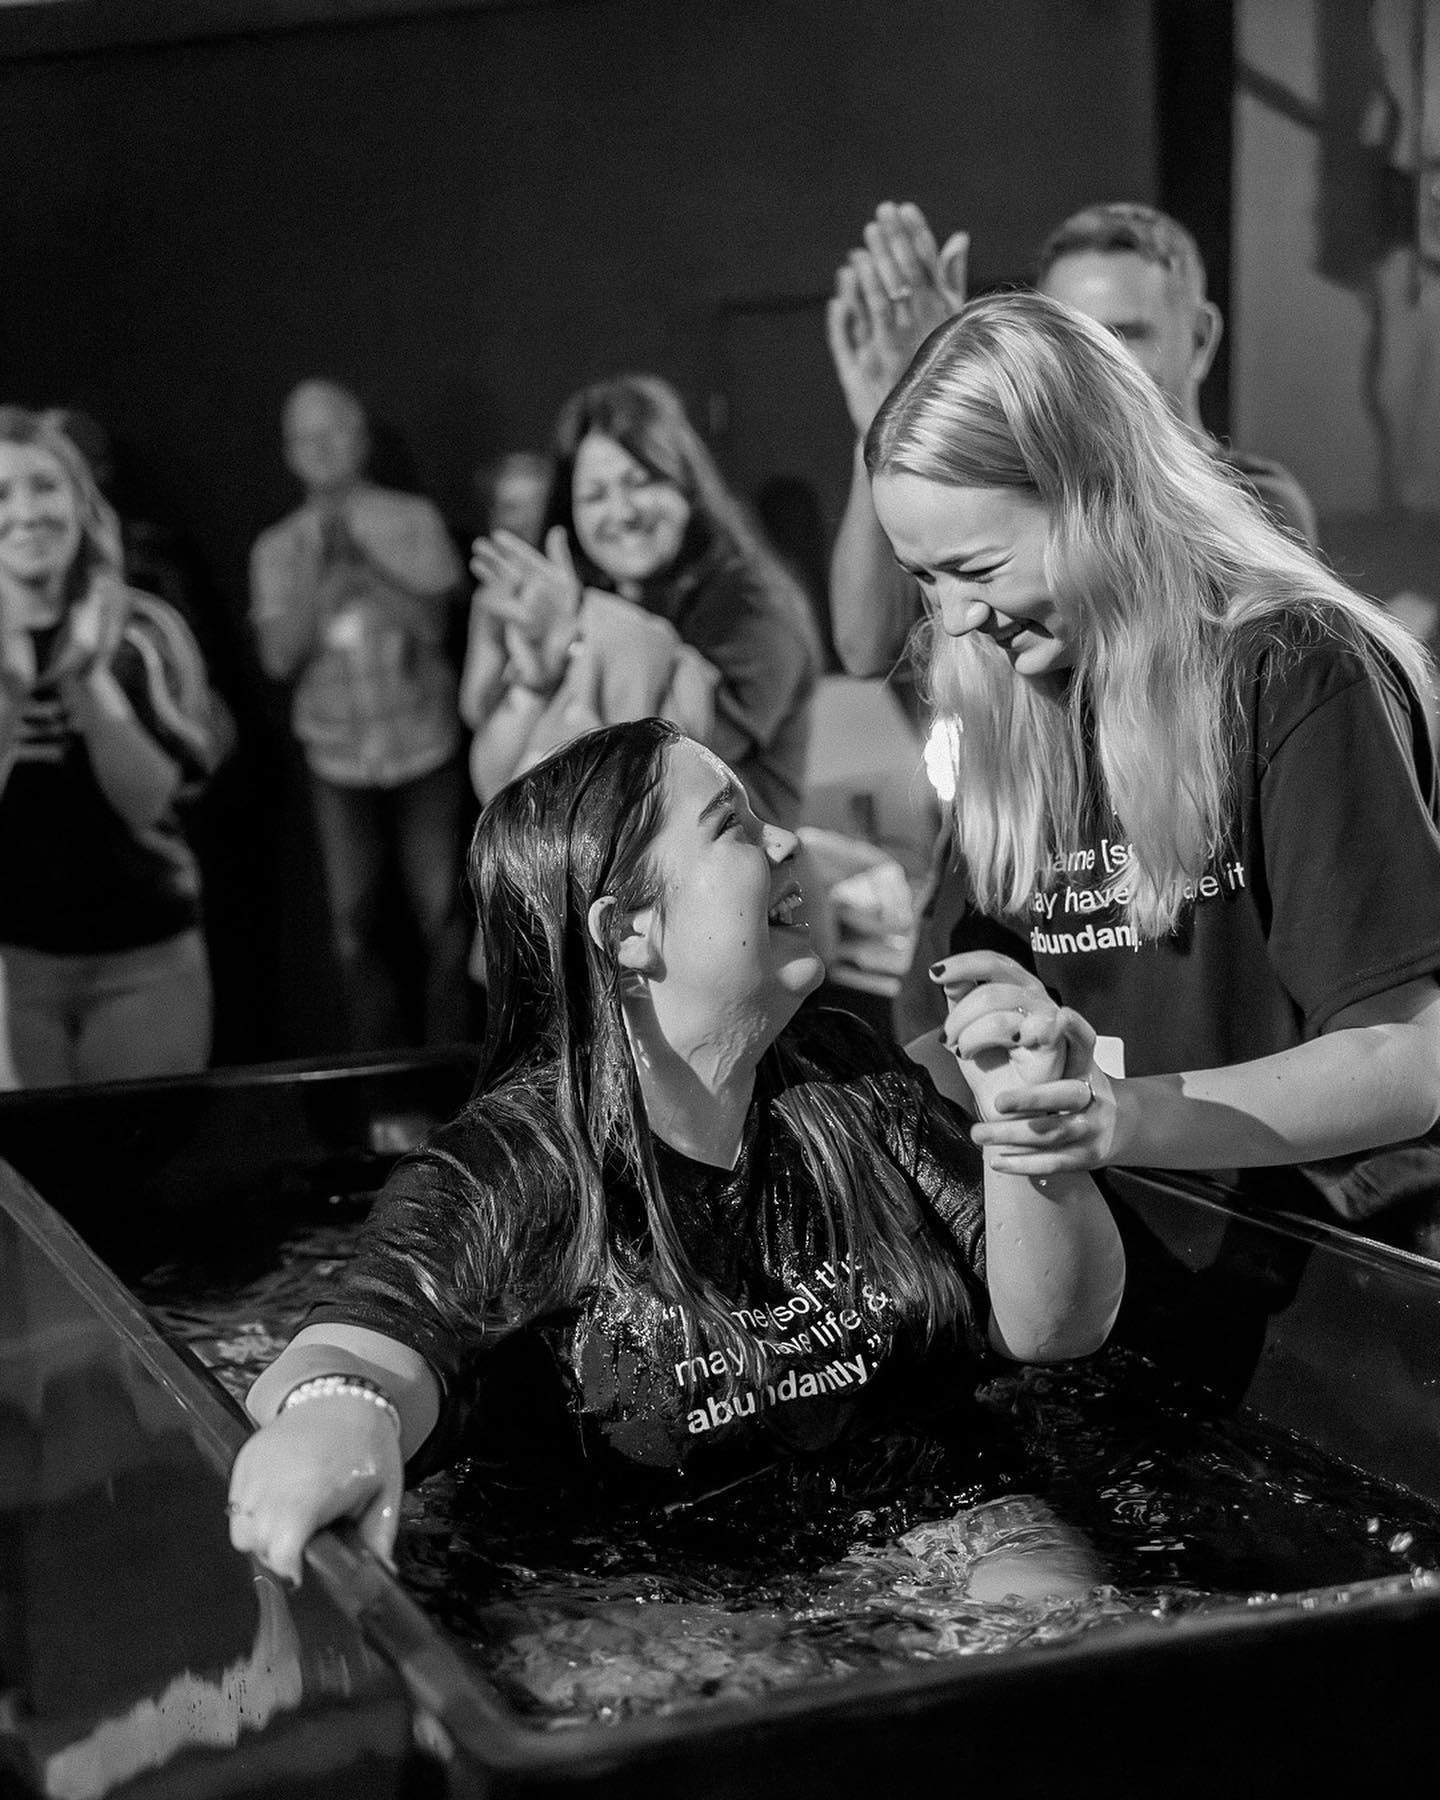 BAPTISM SUNDAY 🌊
We had such an incredible weekend hearing so many stories about how God has moved &amp; celebrated the past being washed clean for so many members of our church family!! Thank you Jesus!!✝️
➡️More photos to come!